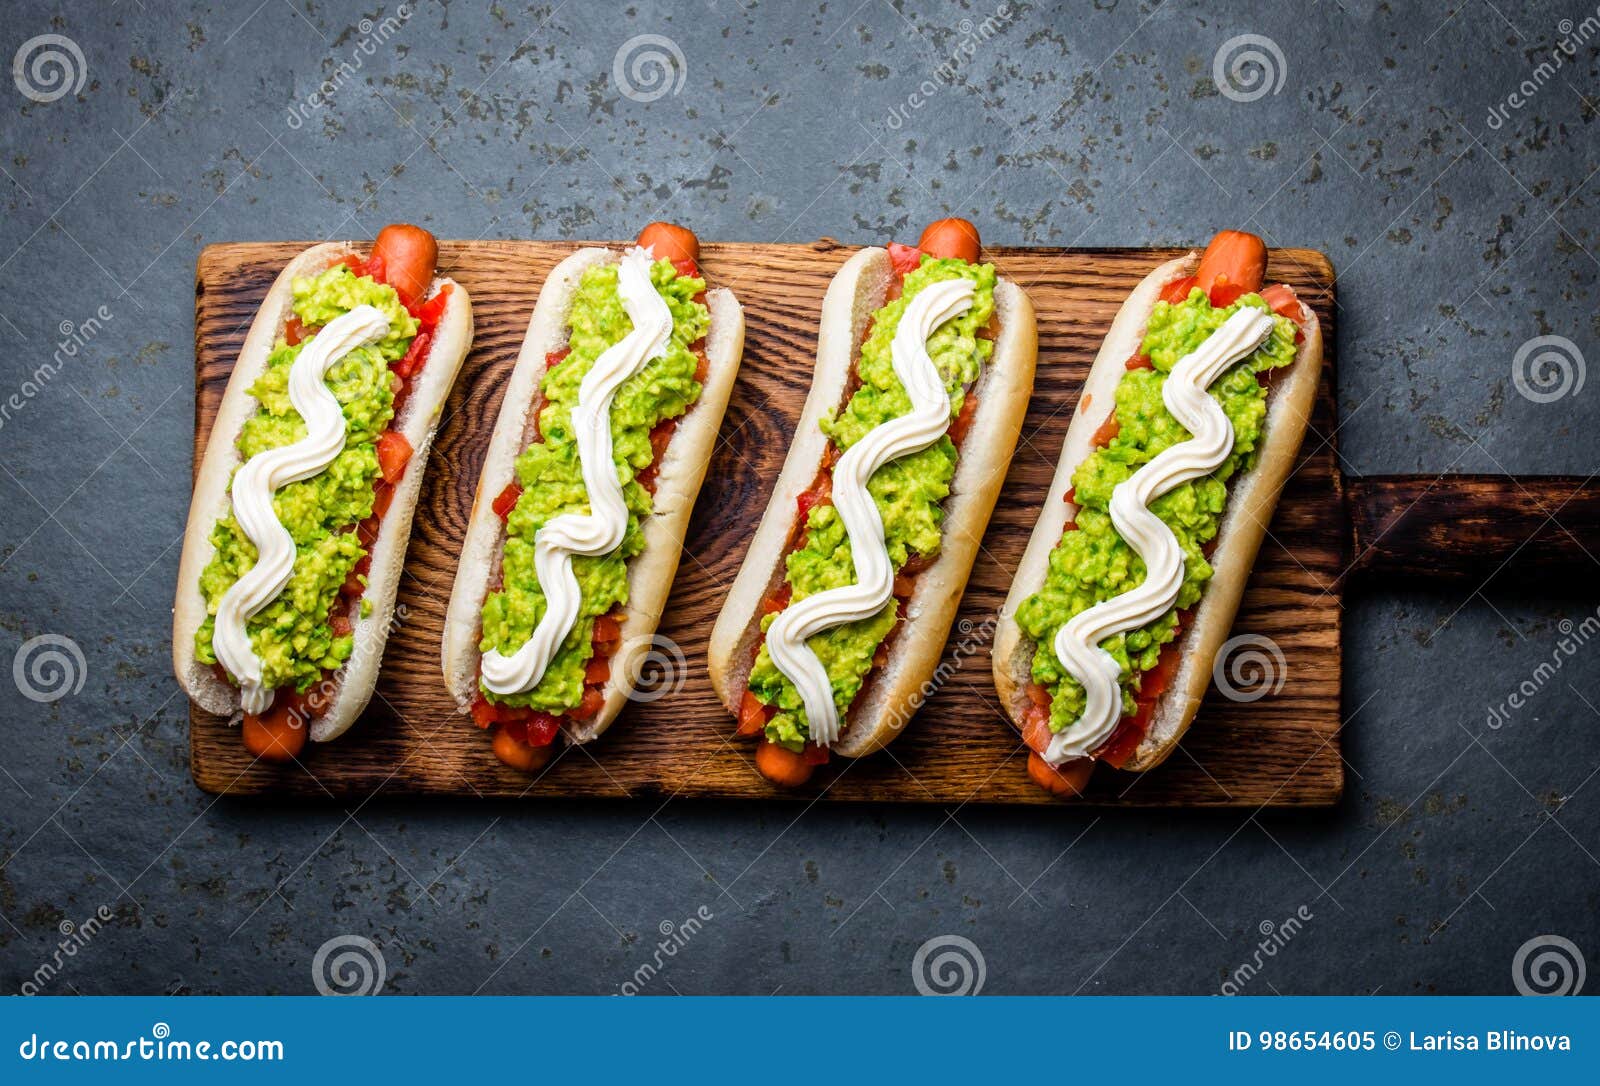 chilean completo italiano. hot dog sandwiches with tomato, avocado and mayonnaise on wooden board. top view.